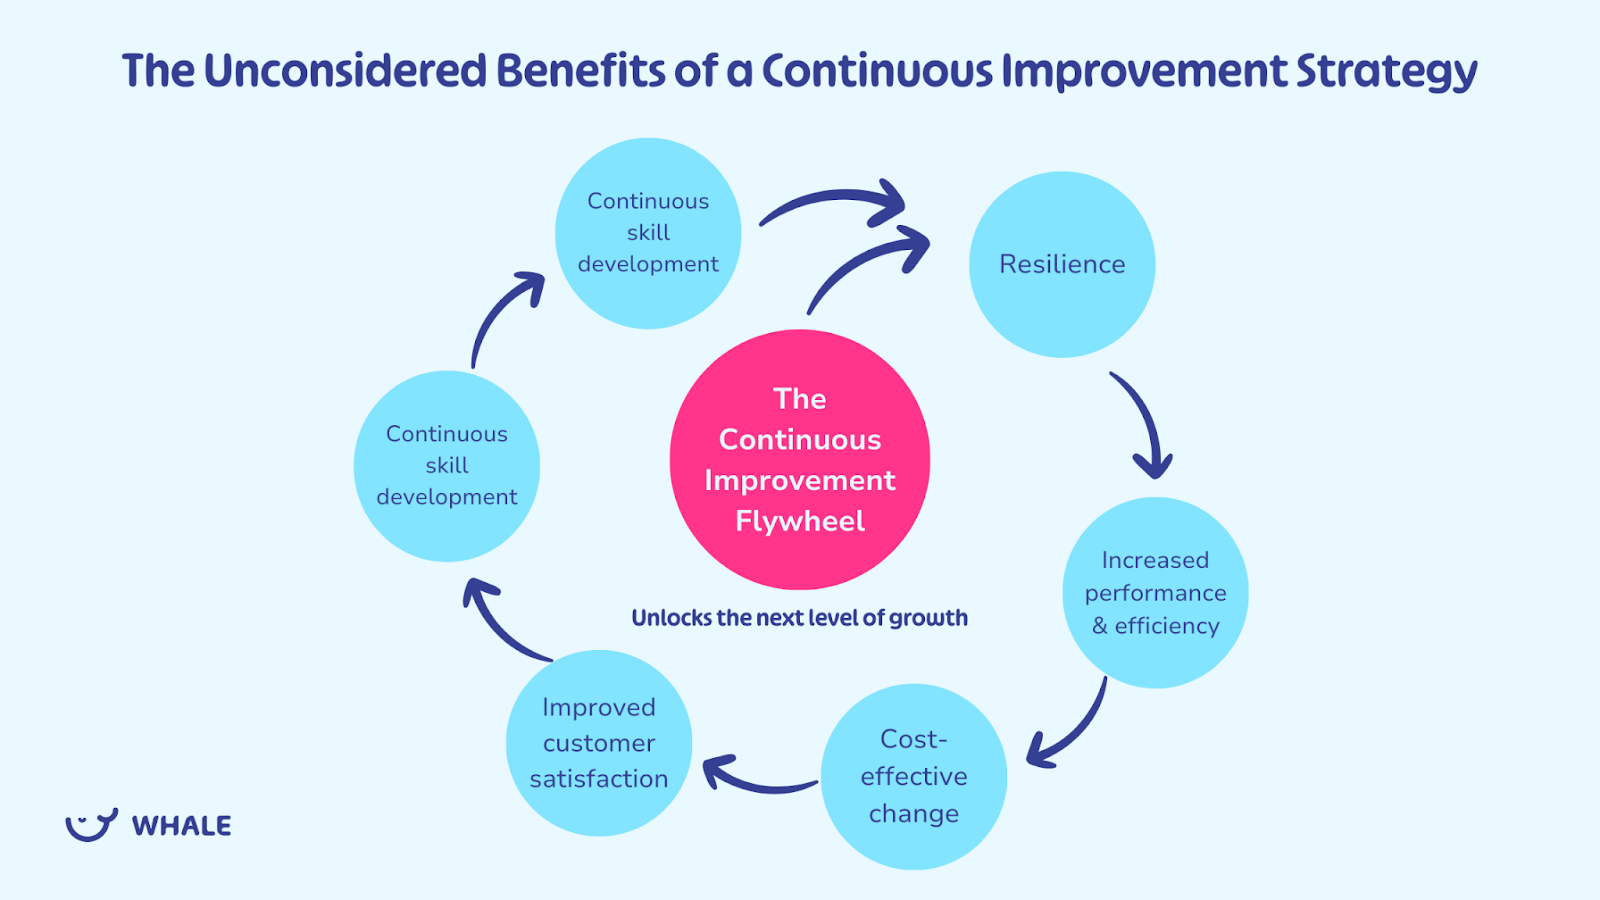 The unconsidered benefits of a continuous improvement strategy